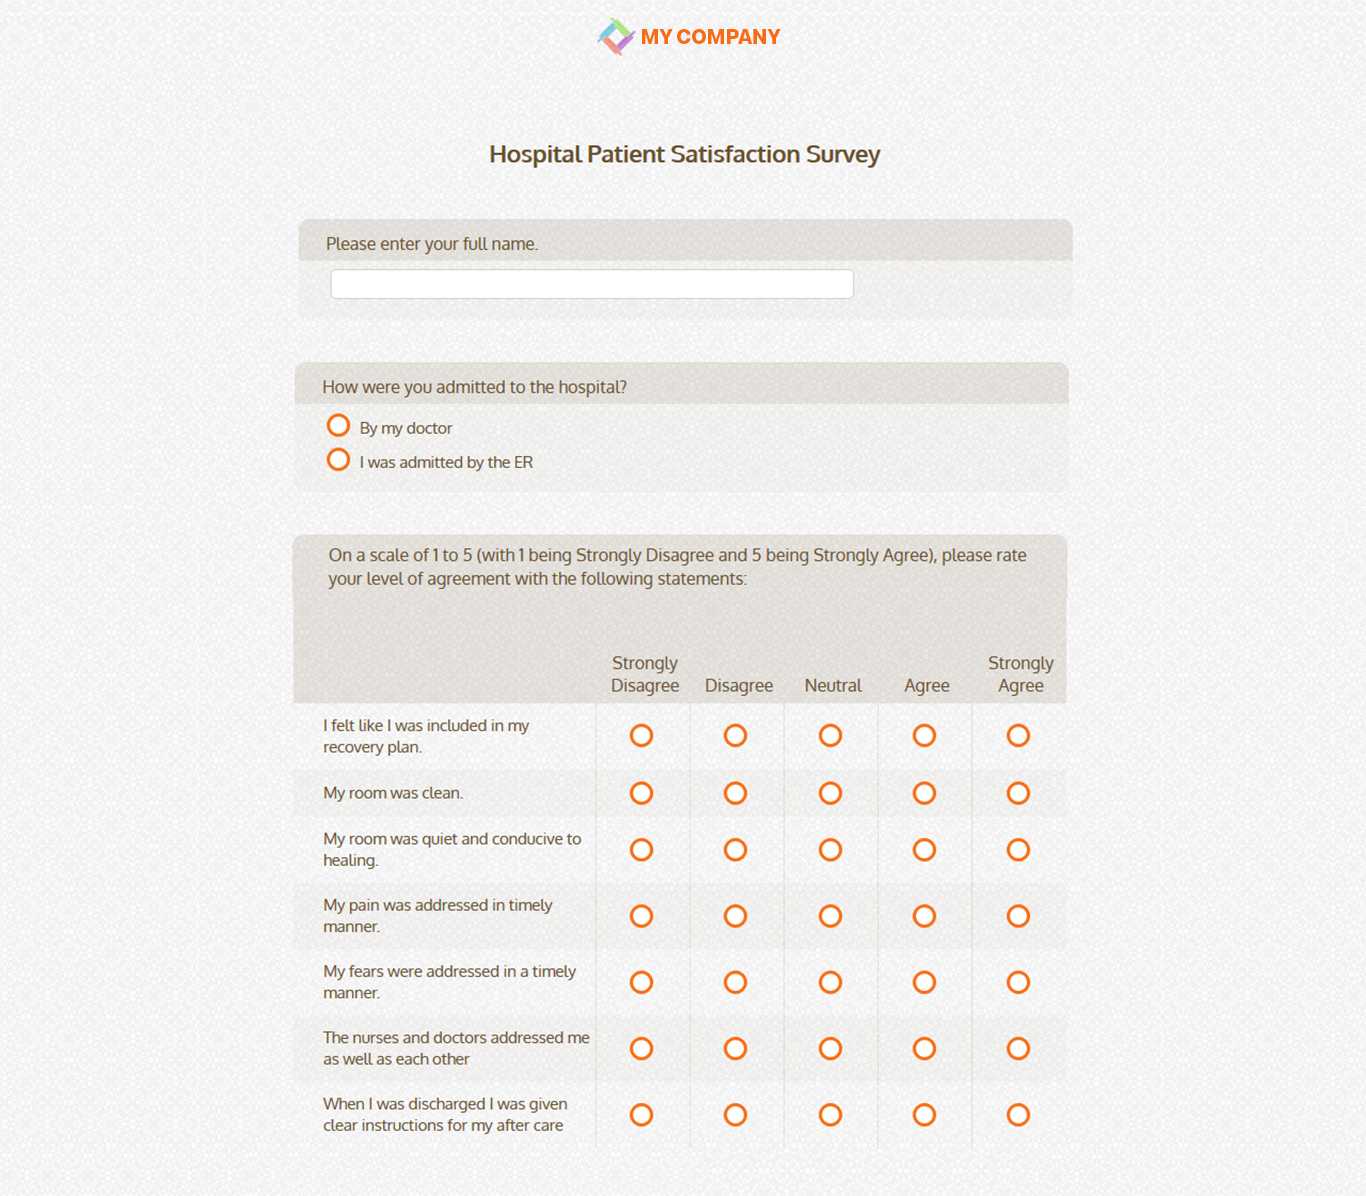 Patient Satisfaction Survey Template [21 Questions] | Sogosurvey Intended For Customer Satisfaction Report Template